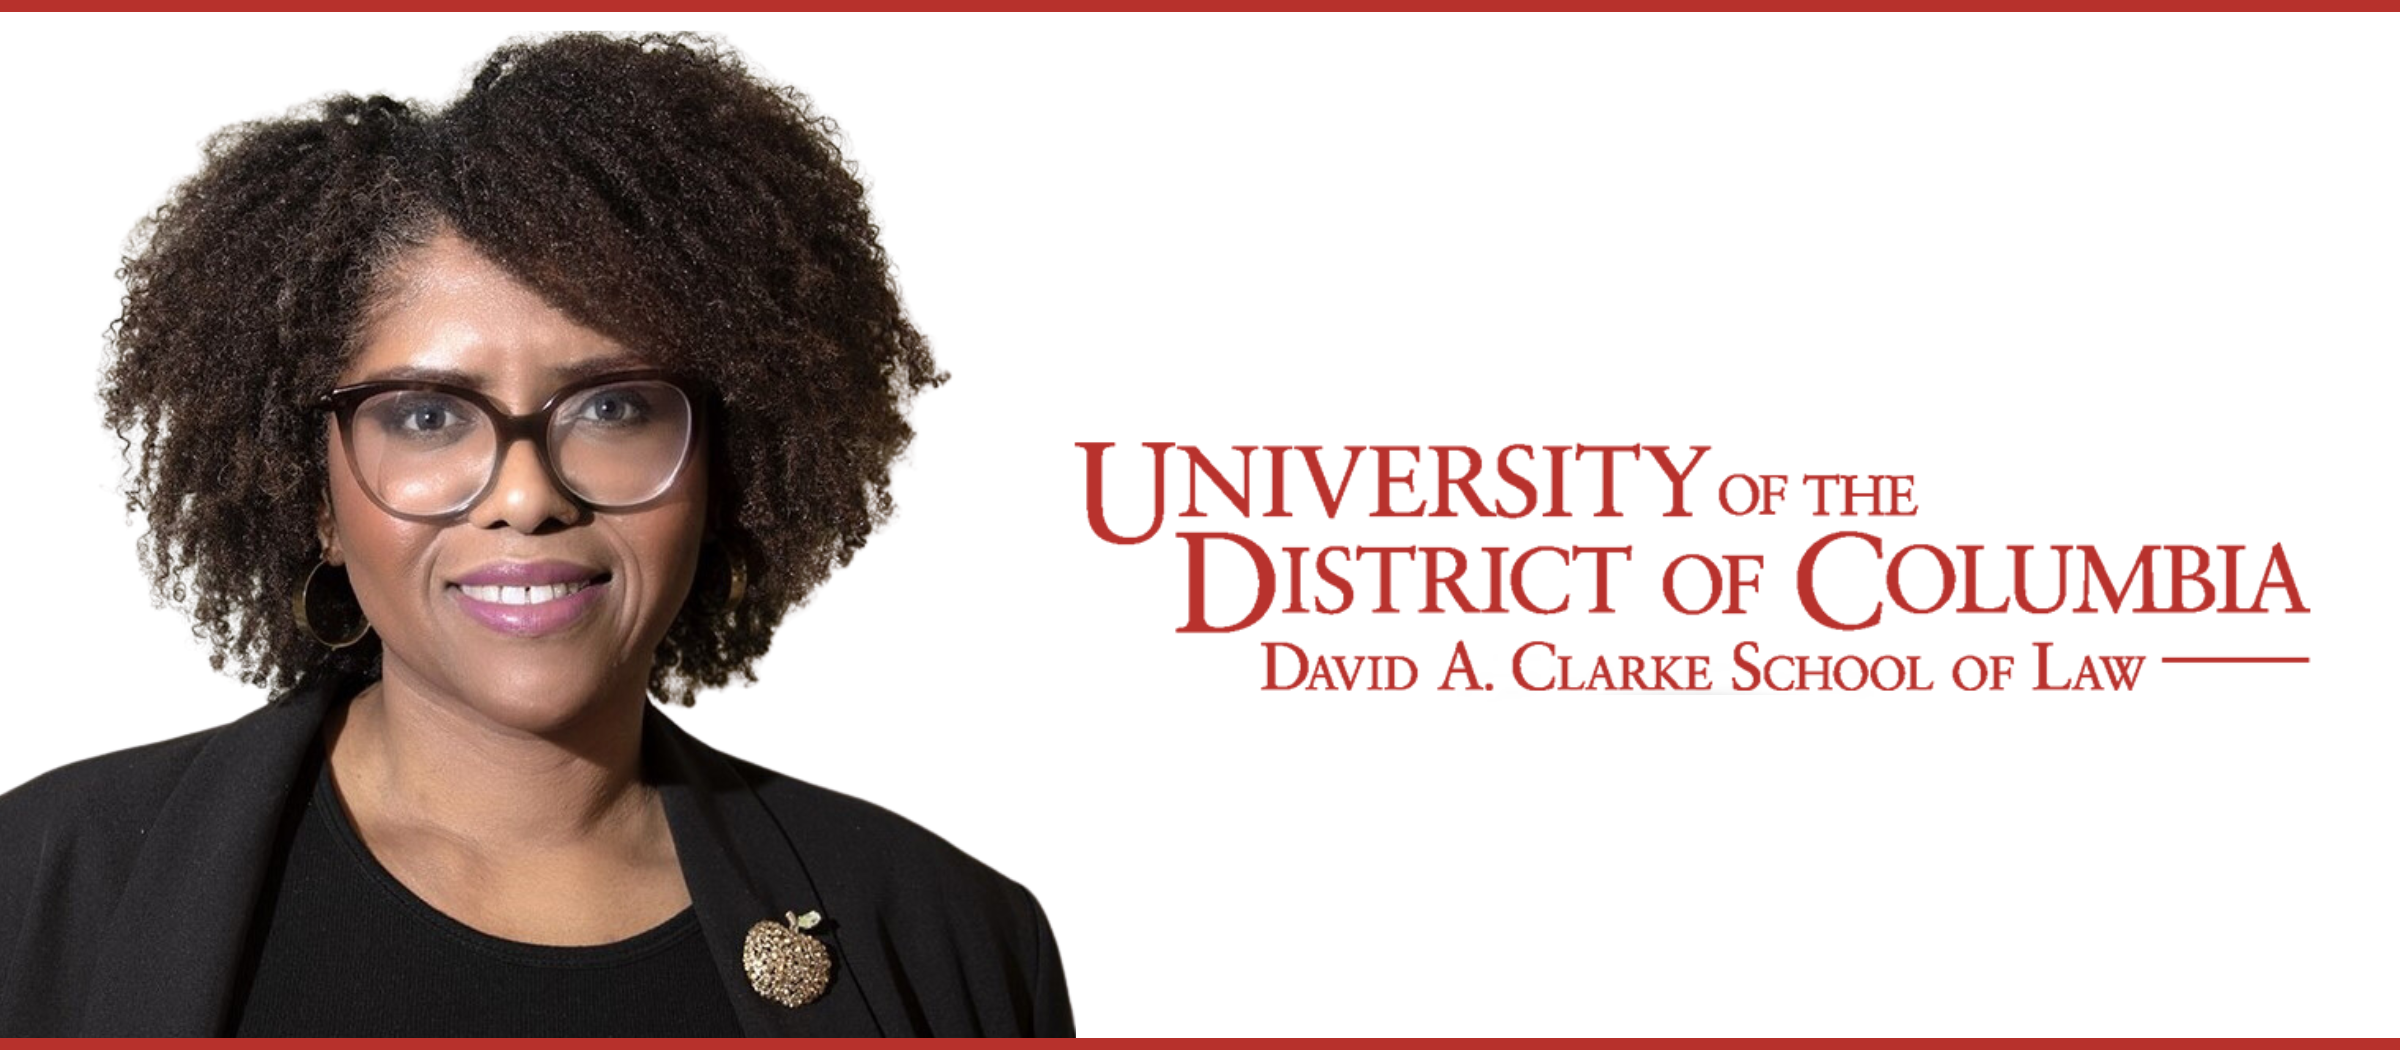 UDC’s Board of Trustees Approves Appointment of Law School Dean